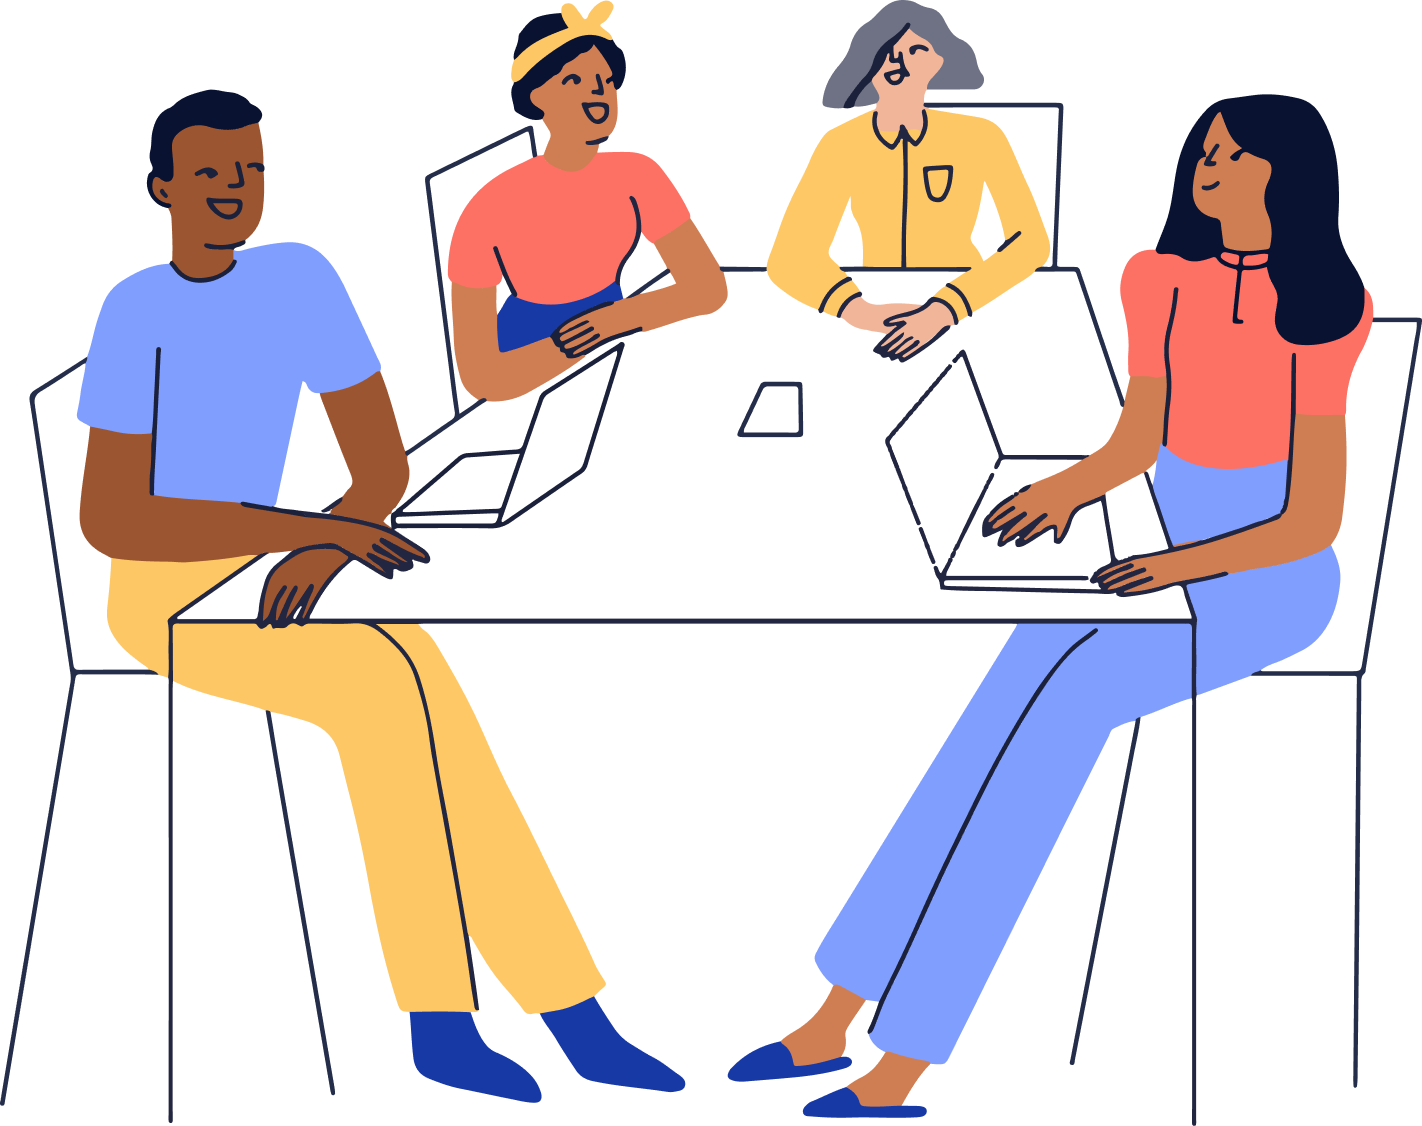 Four people sitting at a table collaborating